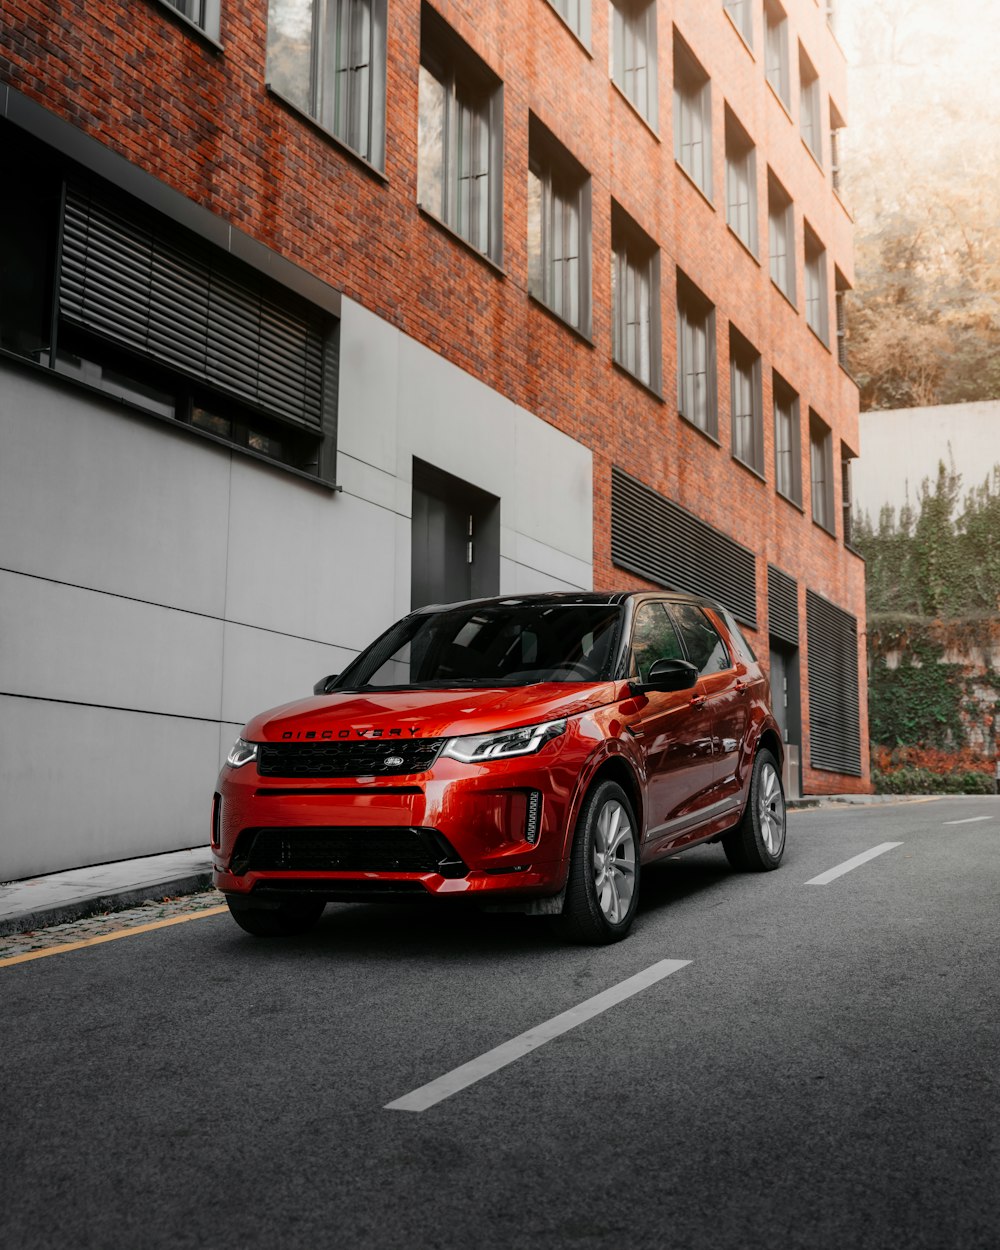 Land Rover Discovery Pictures | Download Free Images on Unsplash